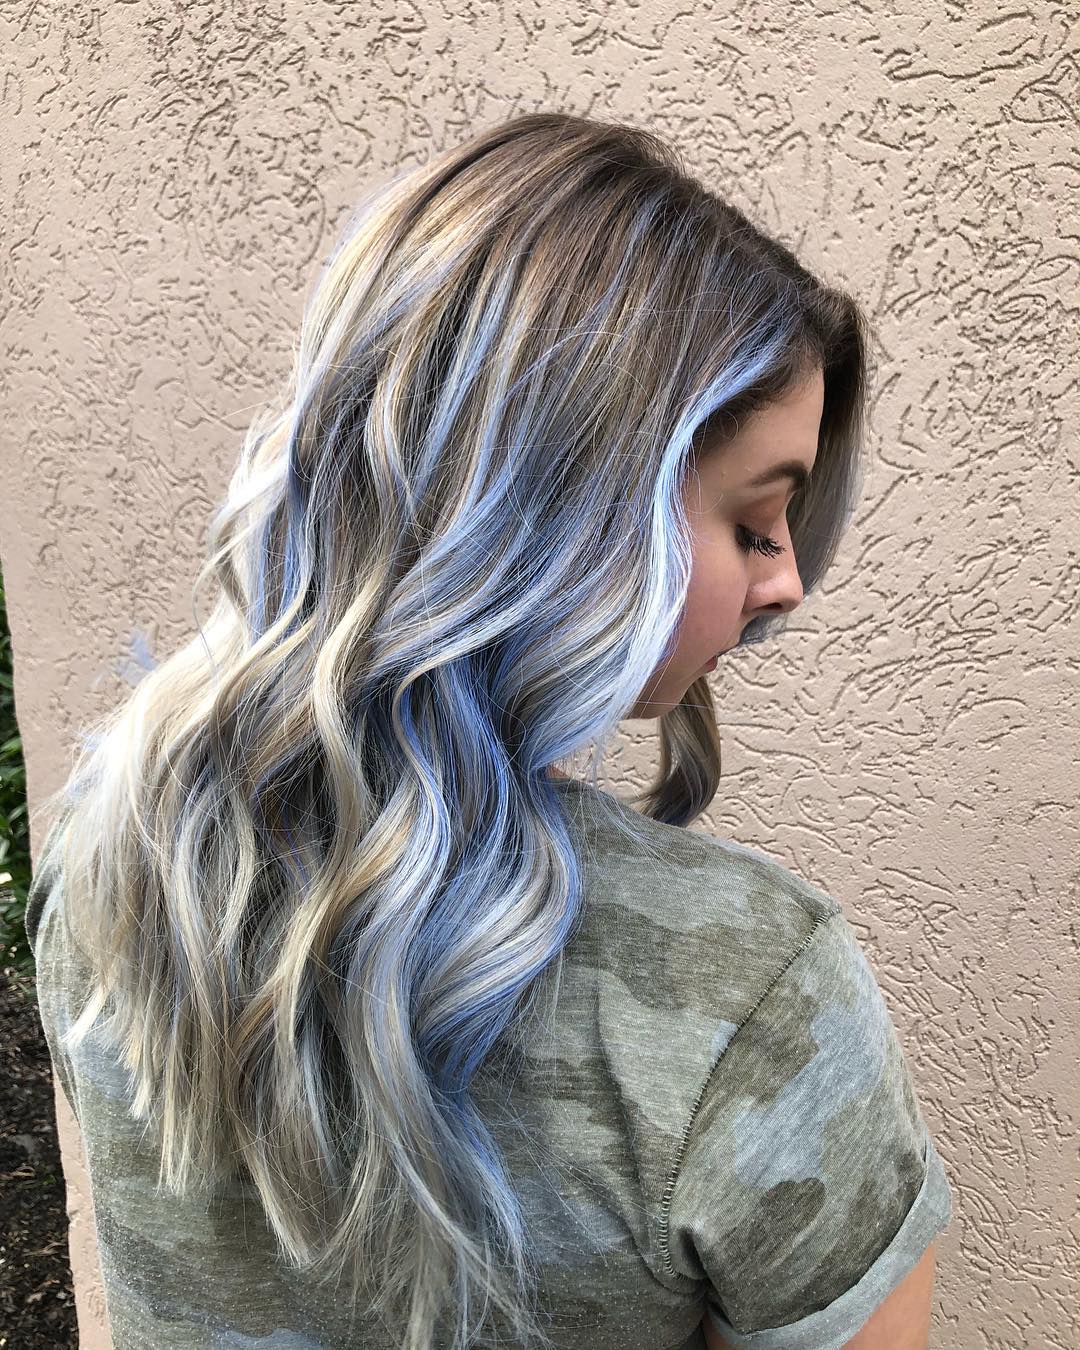 Best Temporary Hair Colors for At-Home Hair Dyeing in 2023 - Hair Adviser